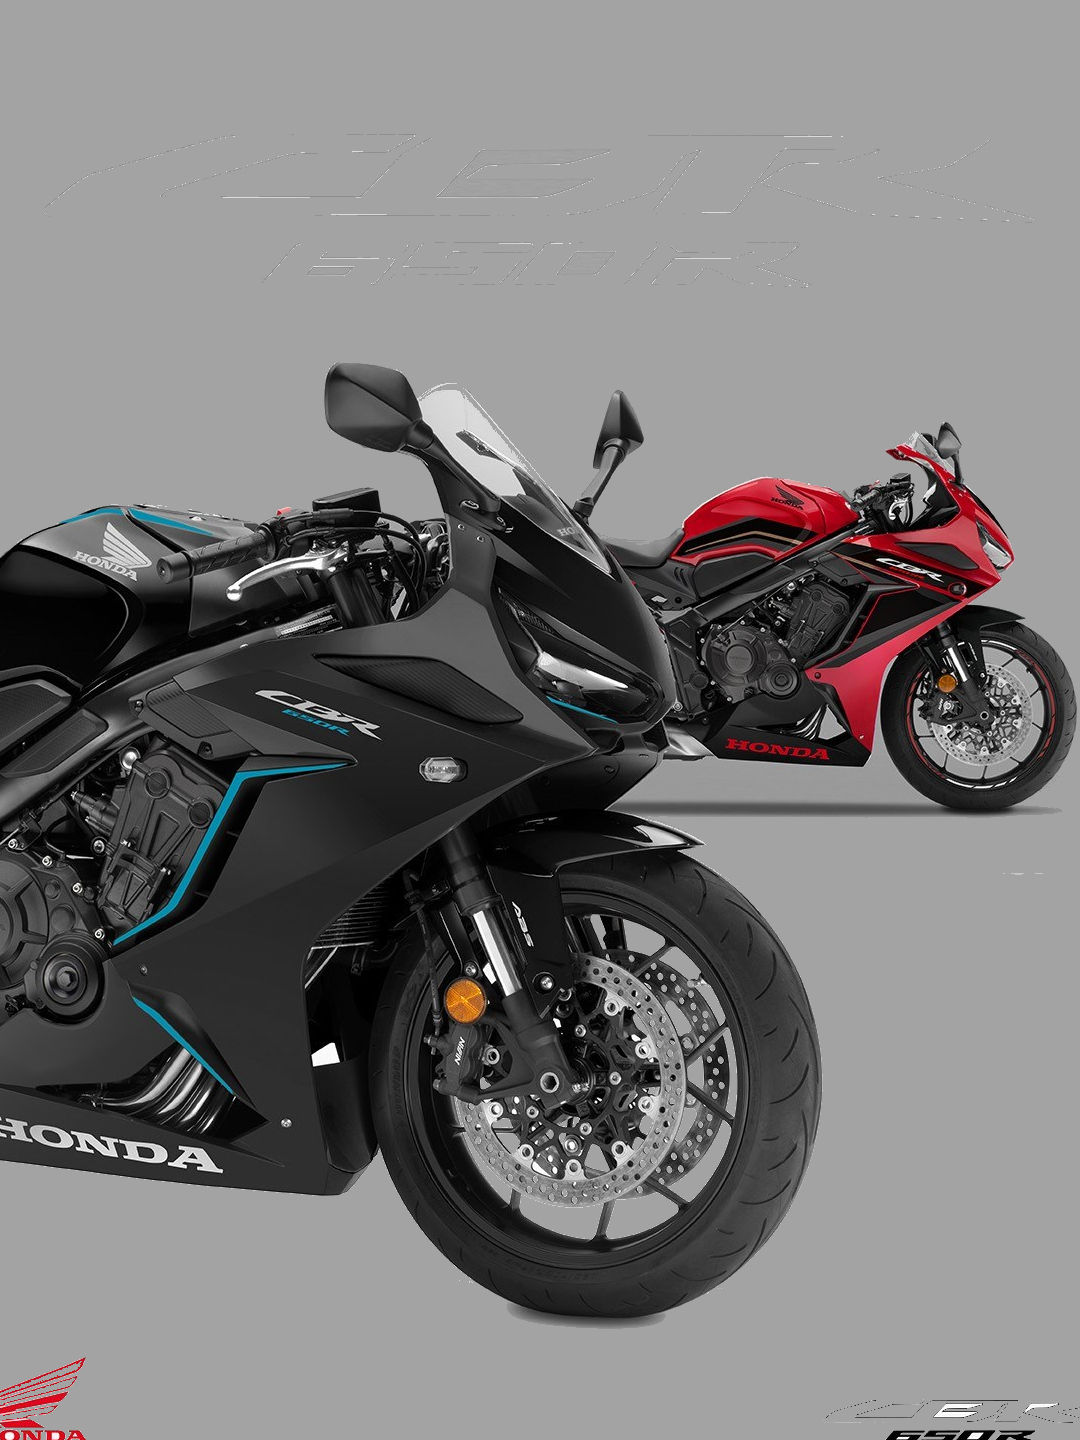 Honda CBR650R HD wallpapers for download | IAMABIKER - Everything  Motorcycle!